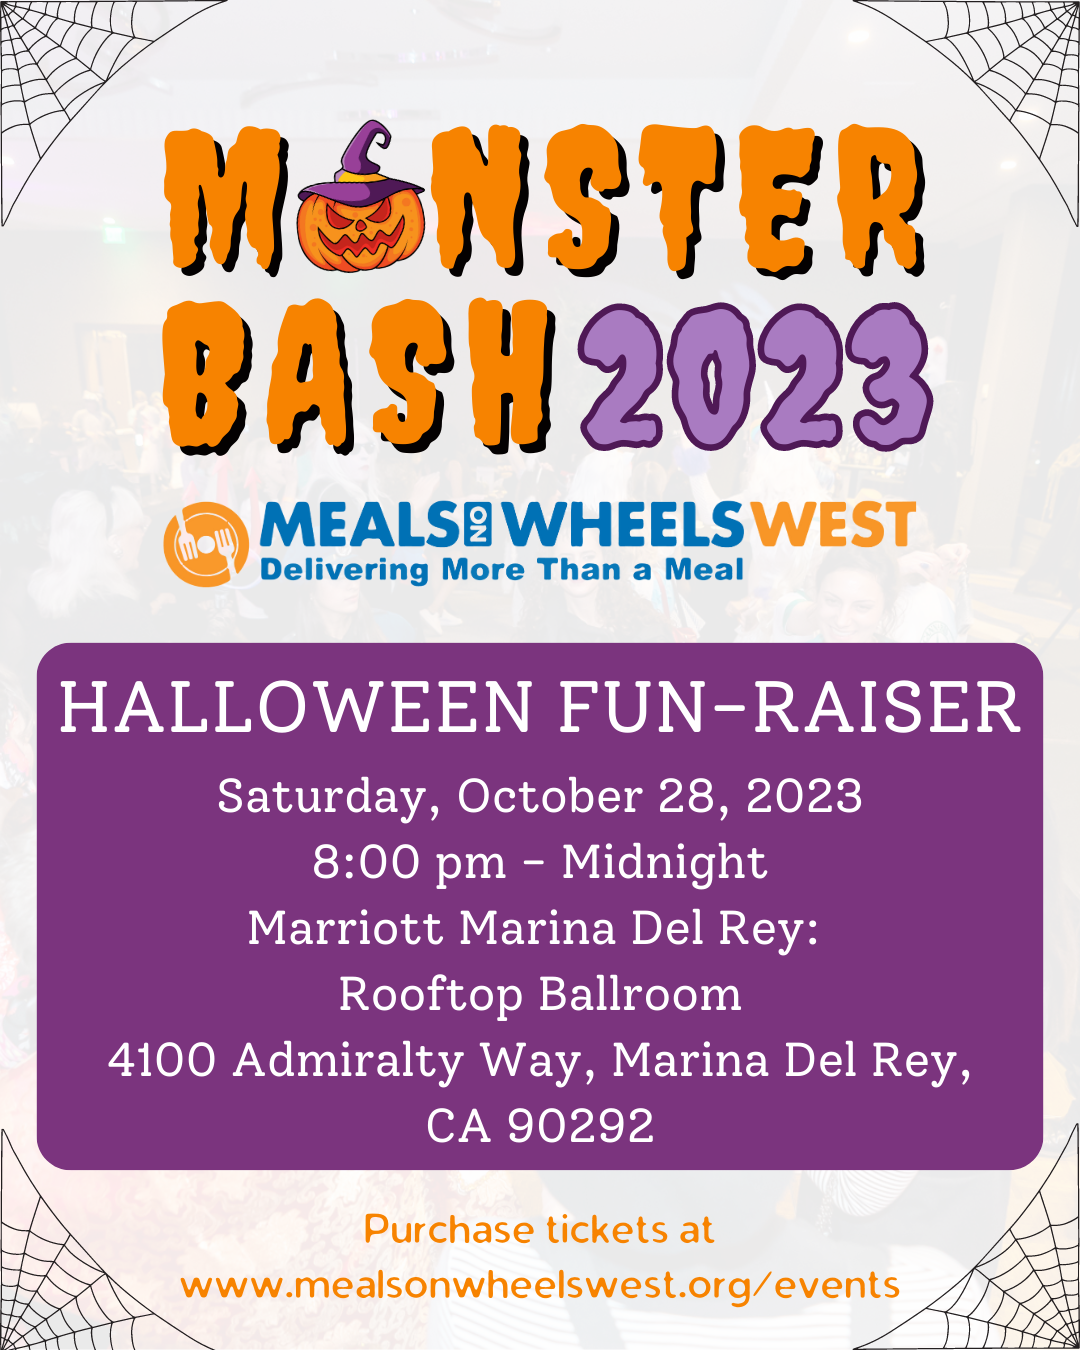 Meals on Wheels West's annual Halloween fundraiser, Monster Bash, is back!